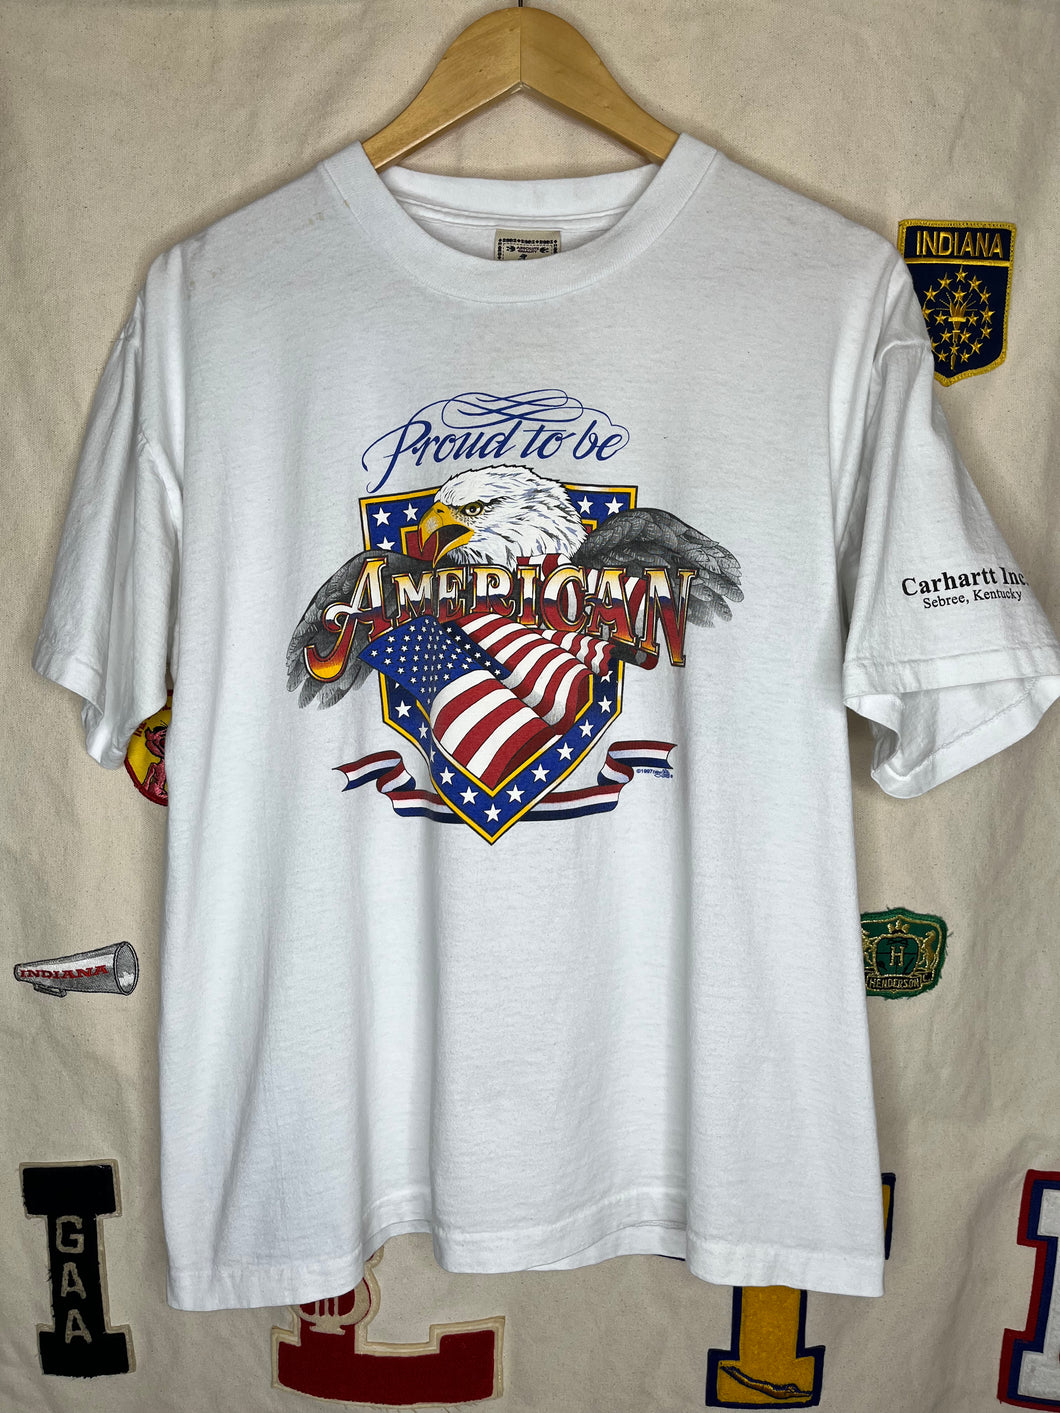 Vintage Carhartt Inc. Proud to be American White T-Shirt: Large